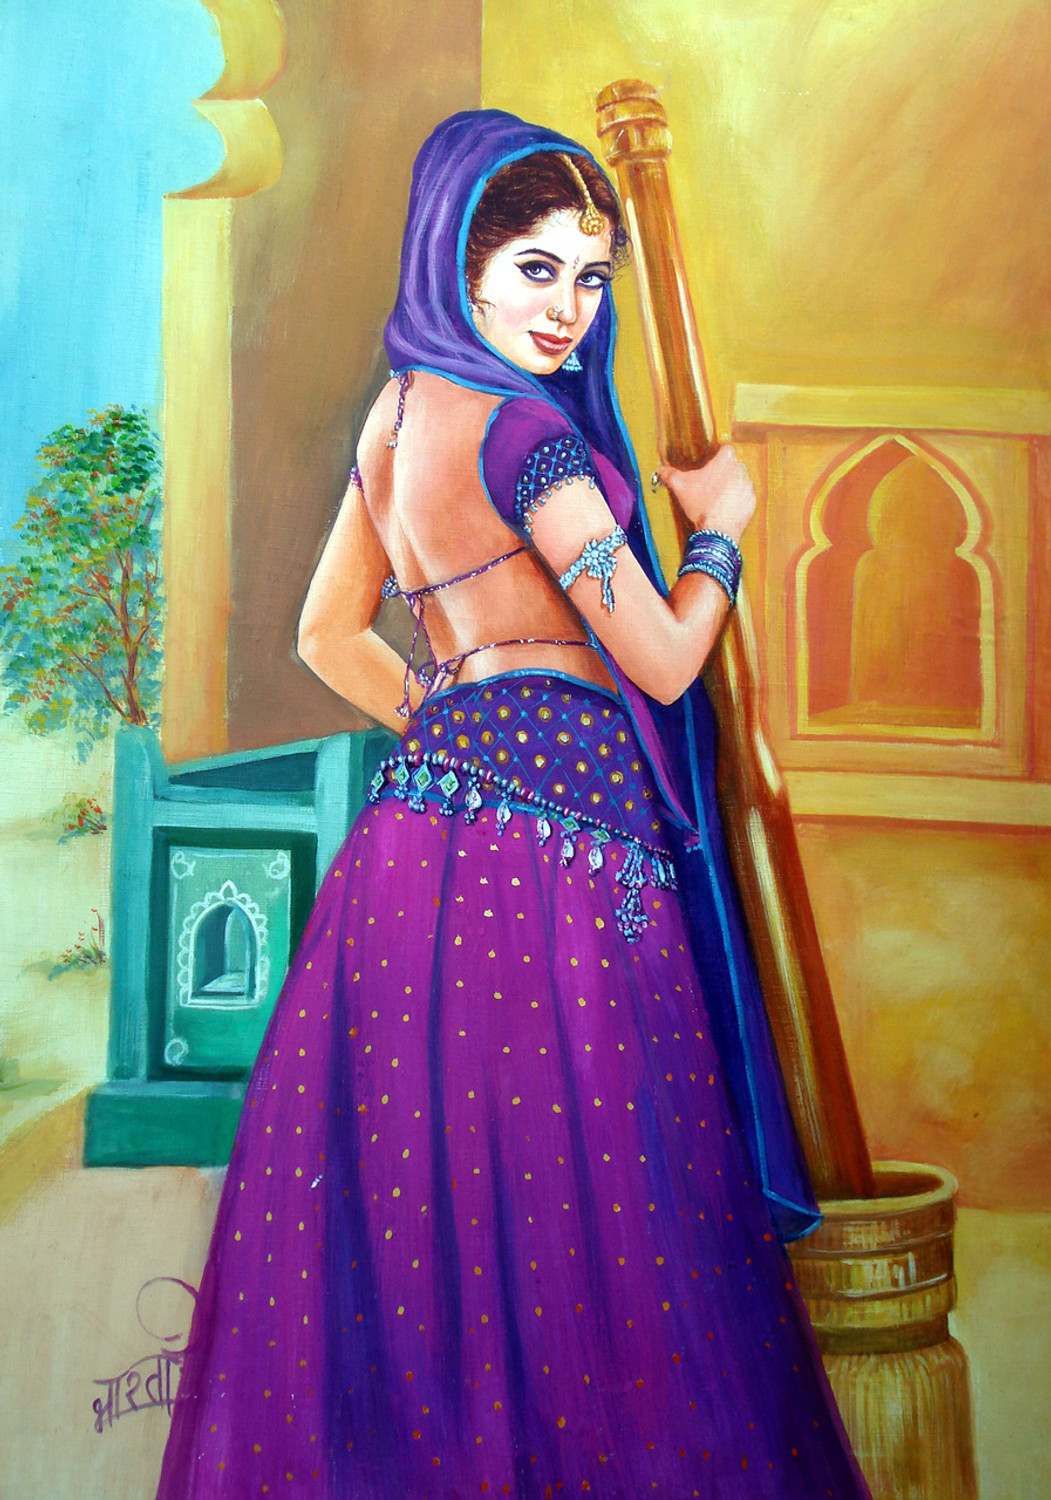 Buy Village Girl Handmade Painting by UMESH BHARTI. Code:ART_4397_39348 -  Paintings for Sale online in India.